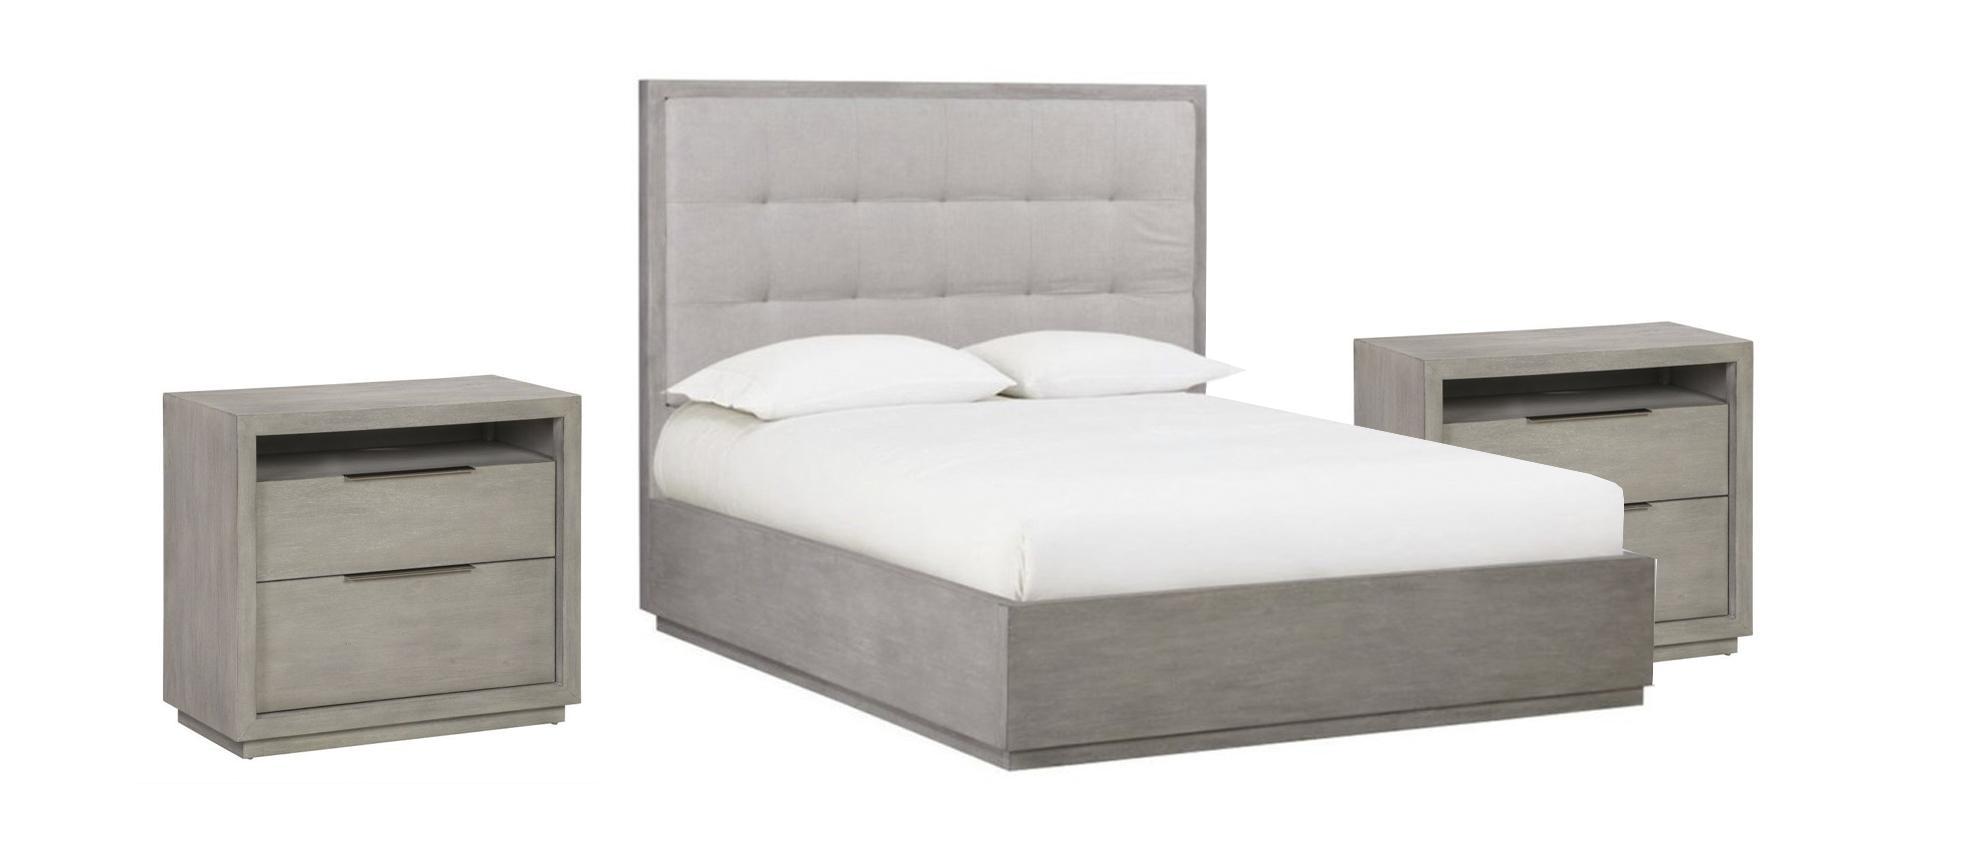 Contemporary Storage Bedroom Set OXFORD STORAGE AZBXS7-2N-3PC in Light Gray, Stone Fabric